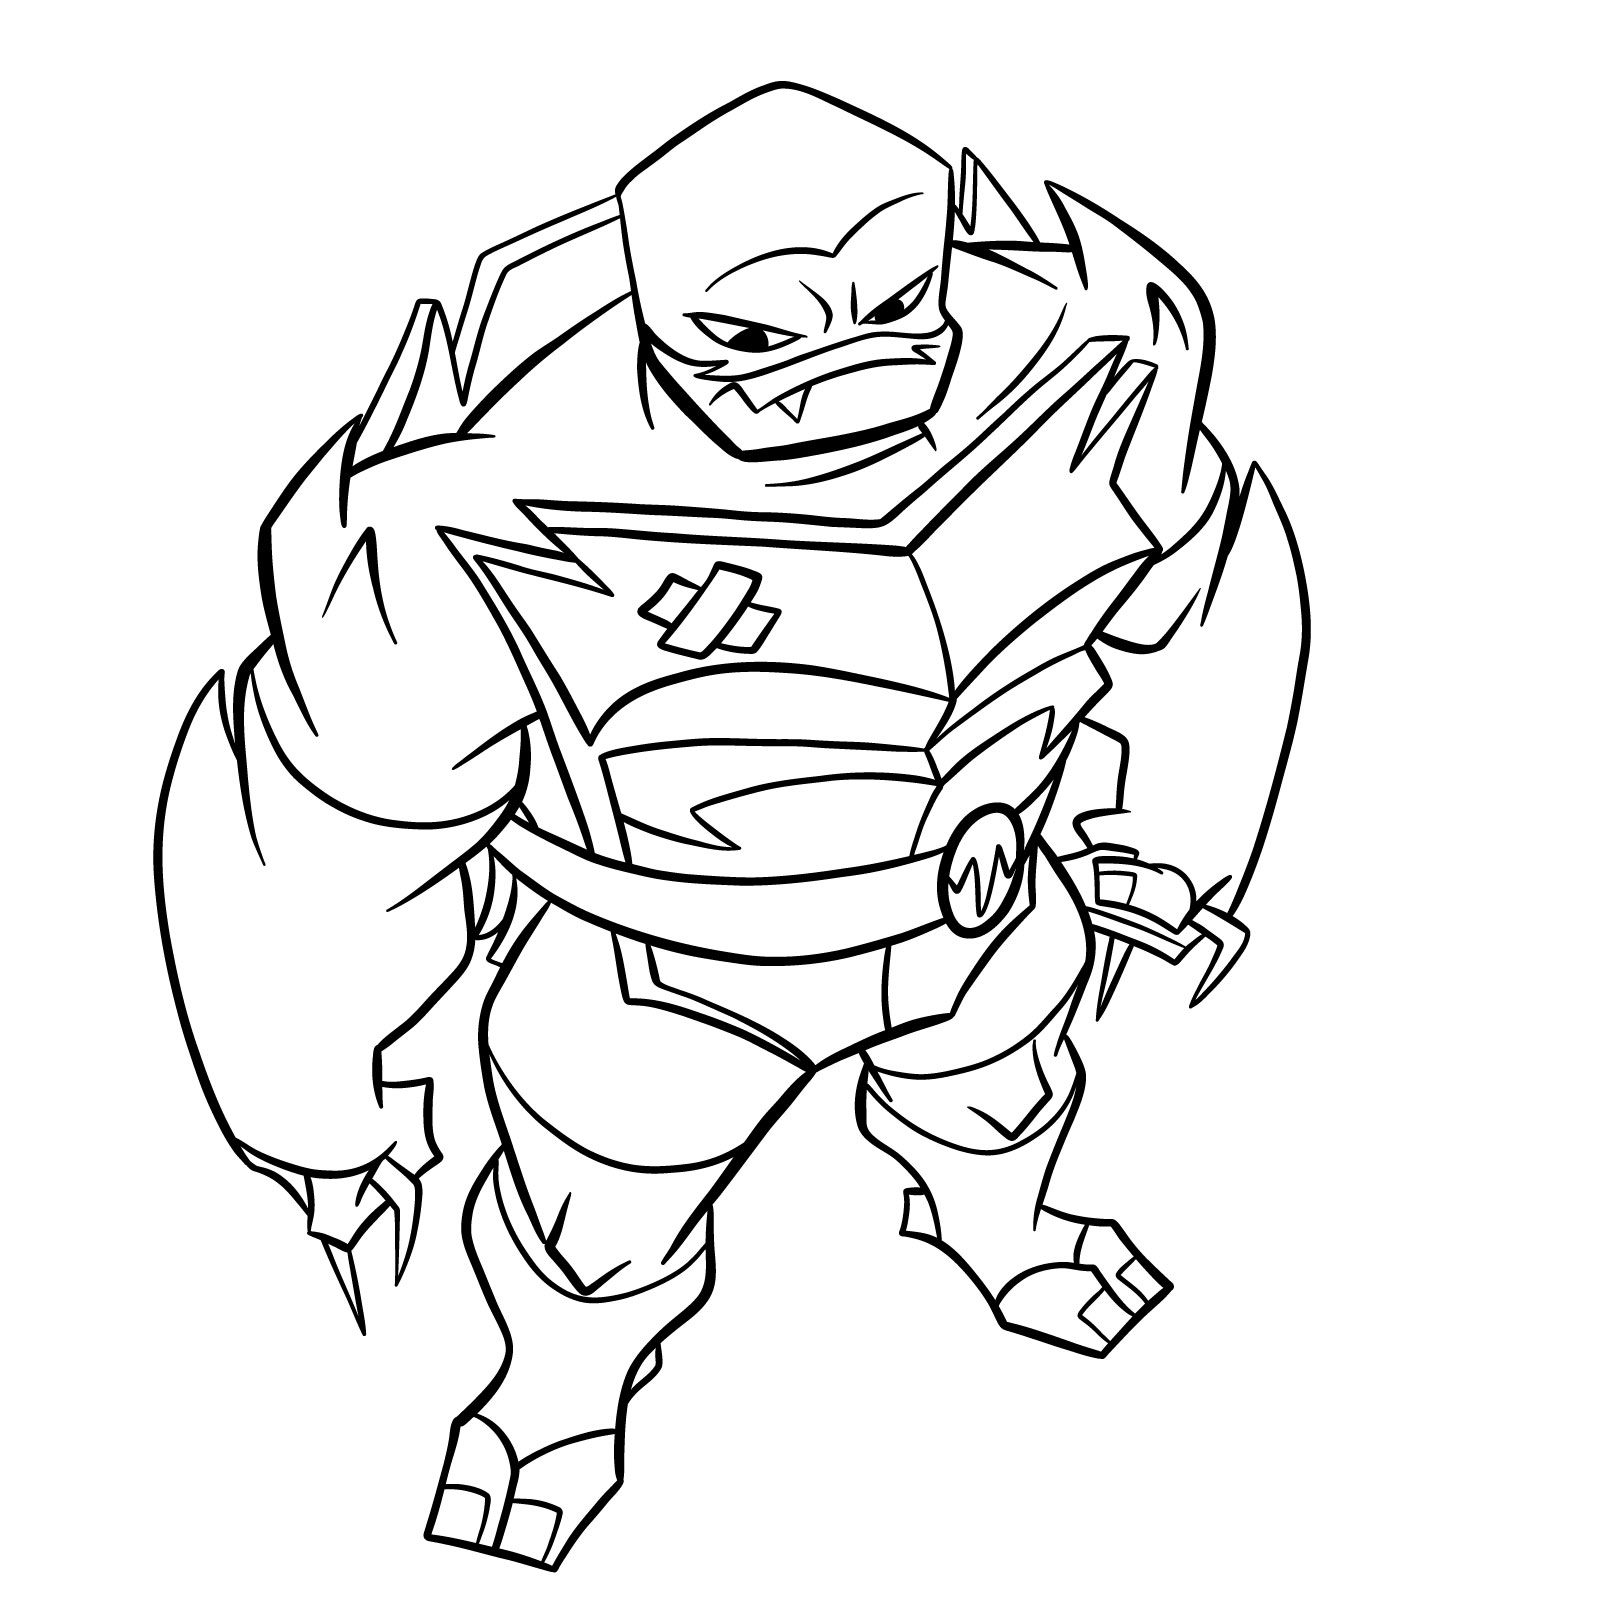 How to draw Raph in Hamato Ninpō state - final step